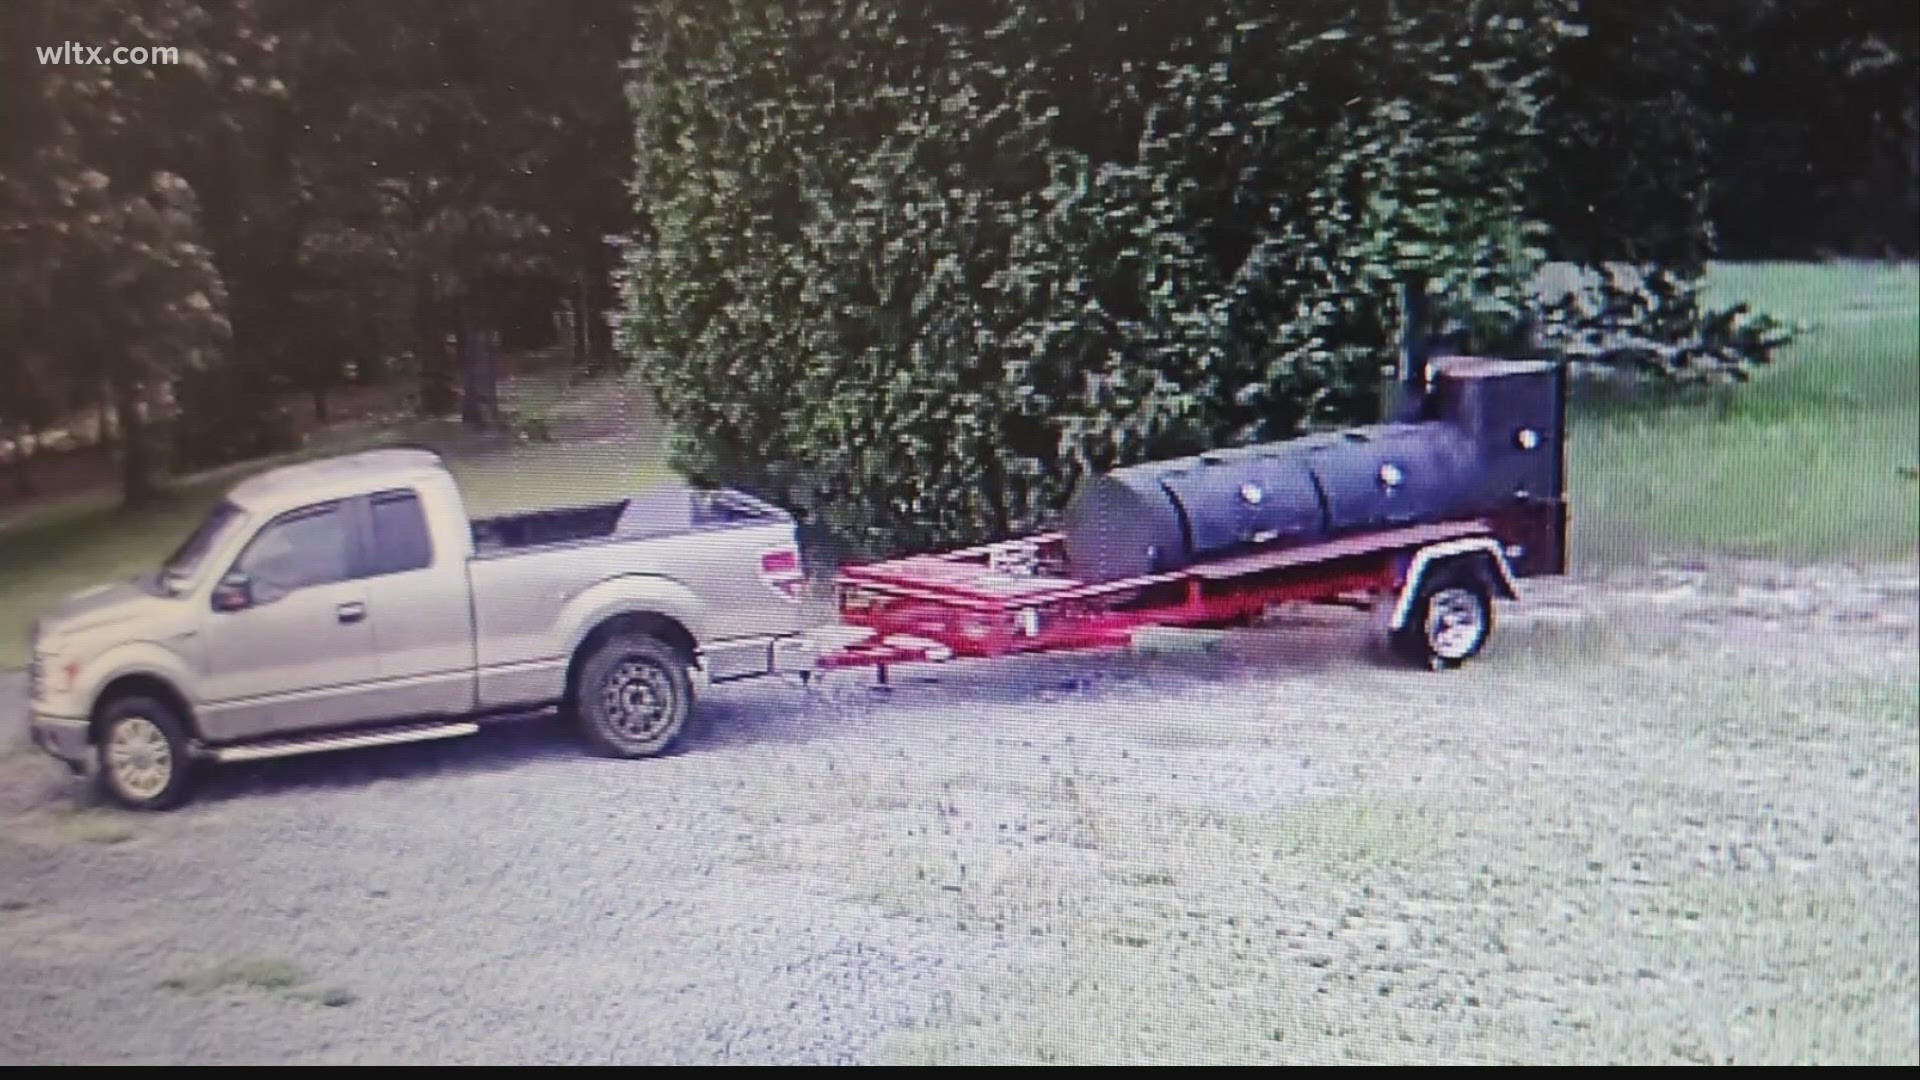 Two suspects were recorded using bolt cutters to remove the grill from a secure ata at the church on Catawba Hill drive.